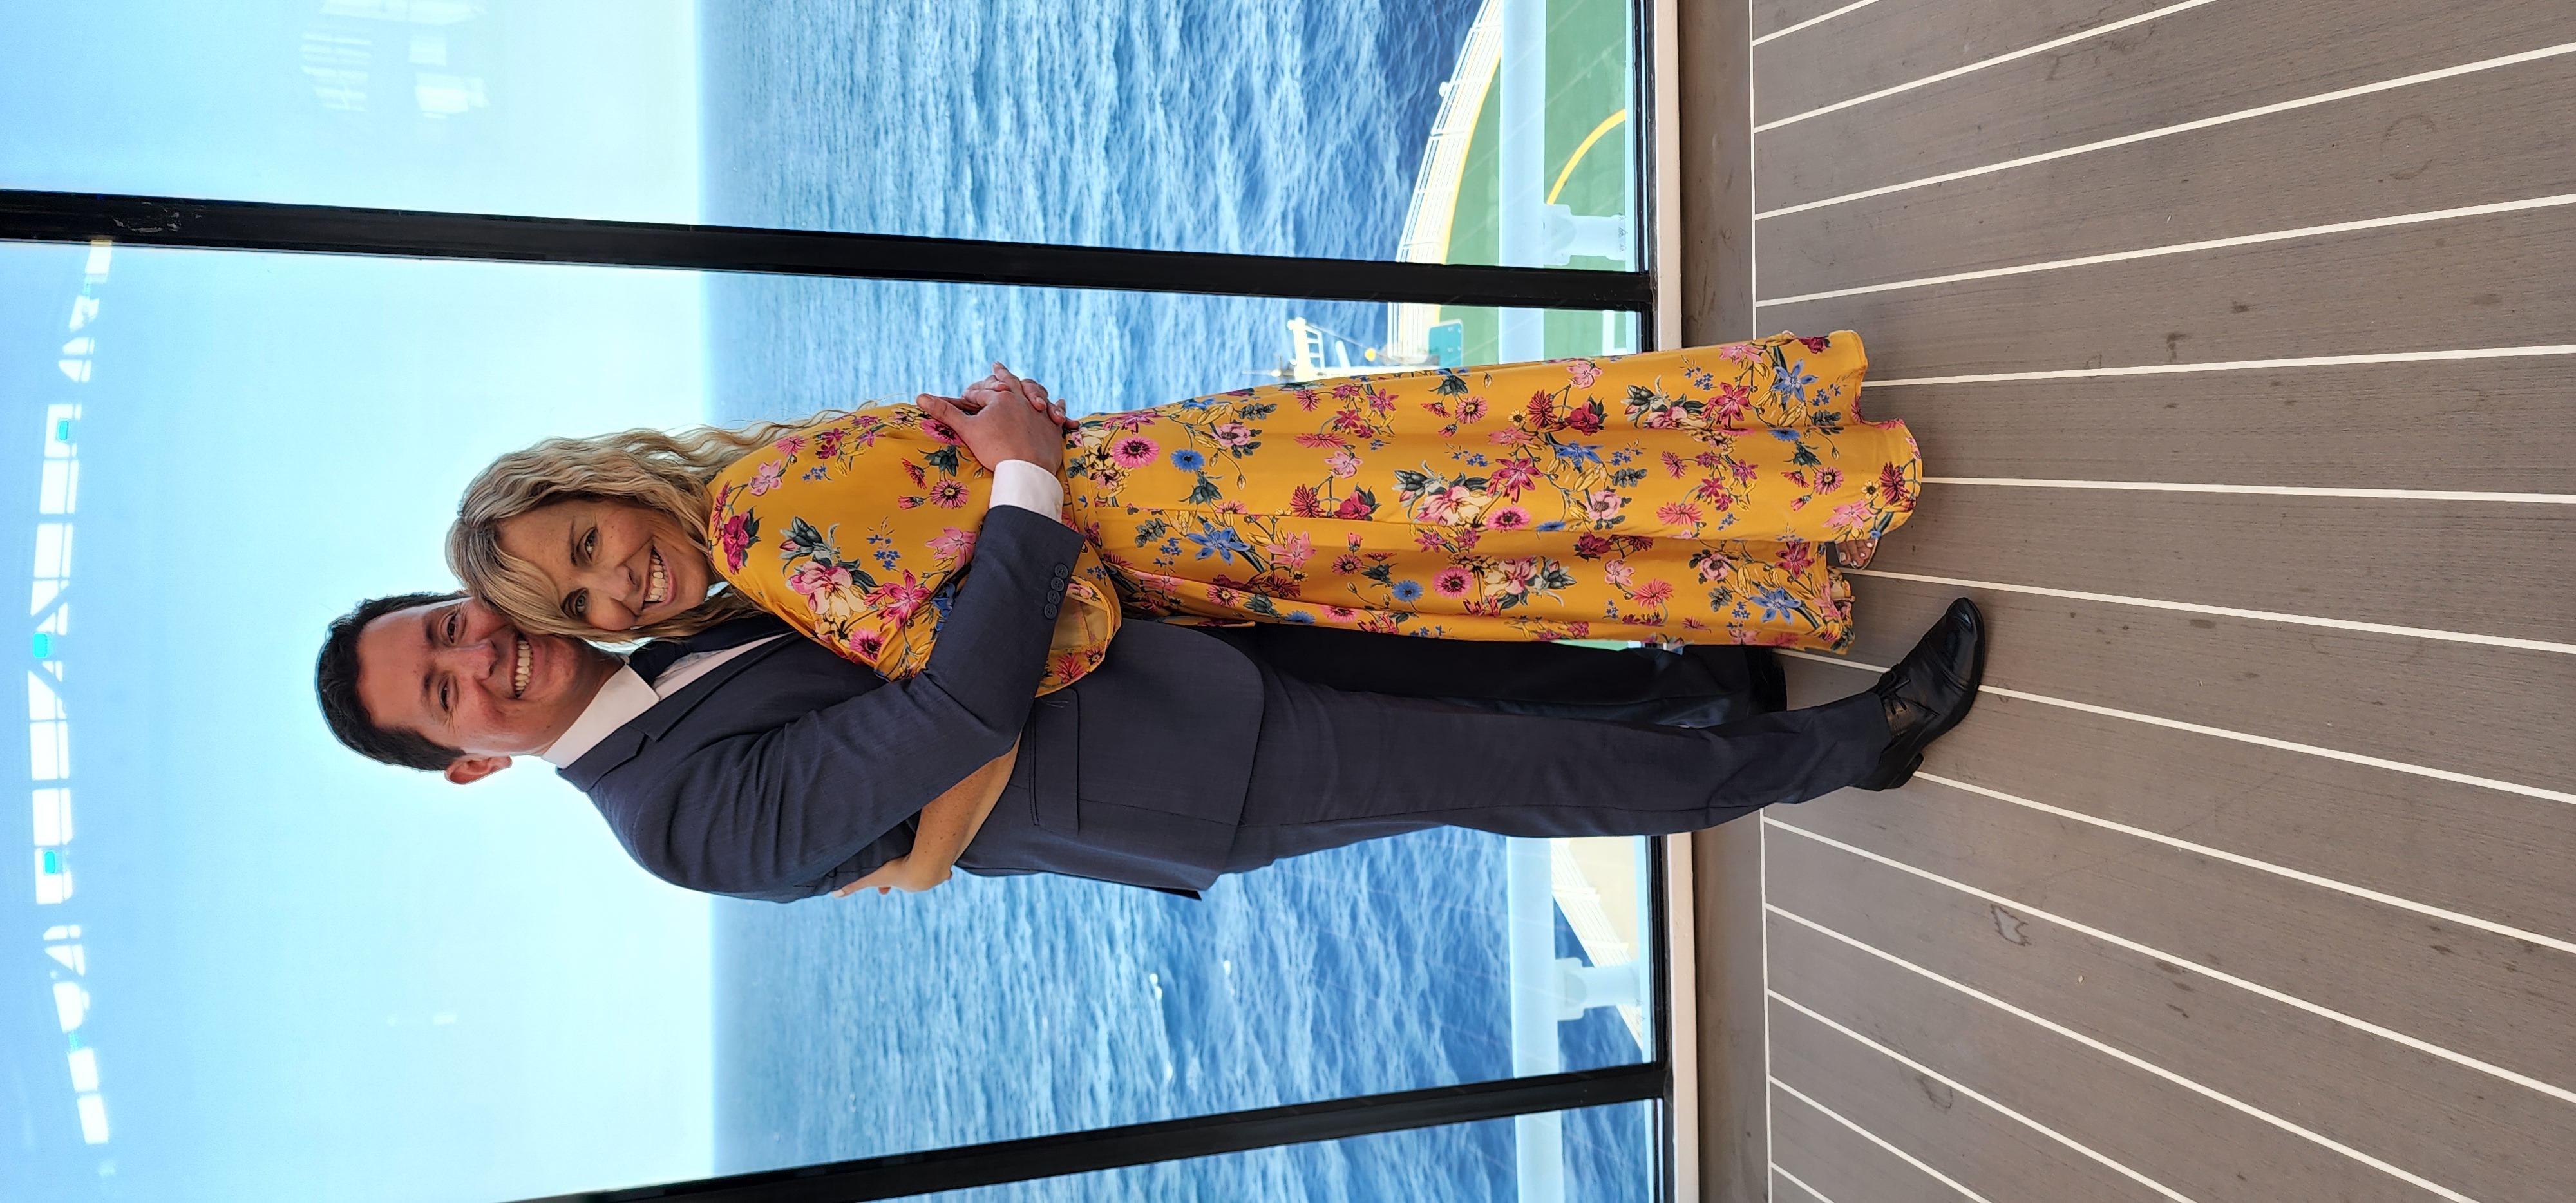 A man and woman in formal evening wear pose for a picture on a cruise ship by a window with the ocean in the background.